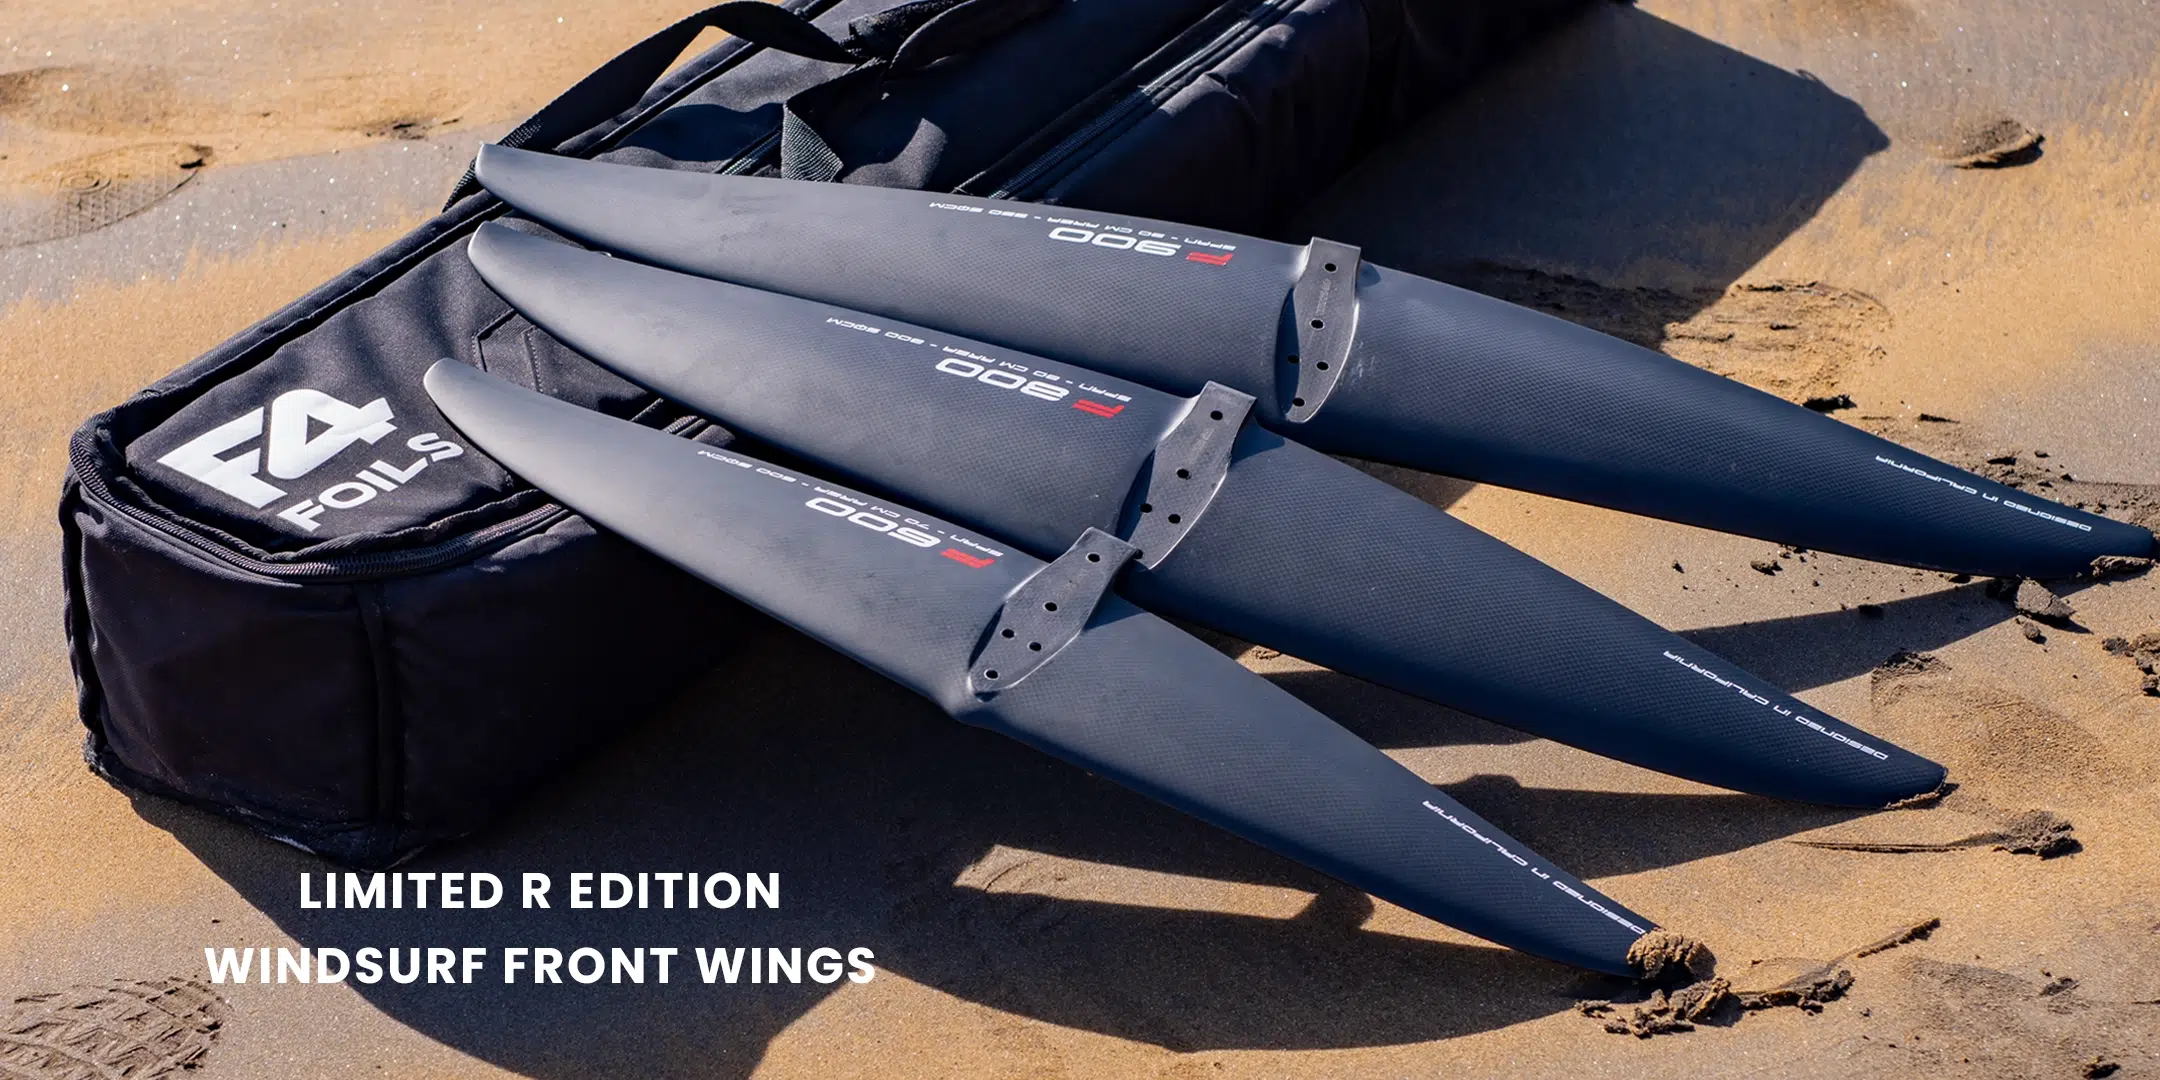 Limited R Edition windsurf front wings F4 Foils Limited edition wings and fuselages